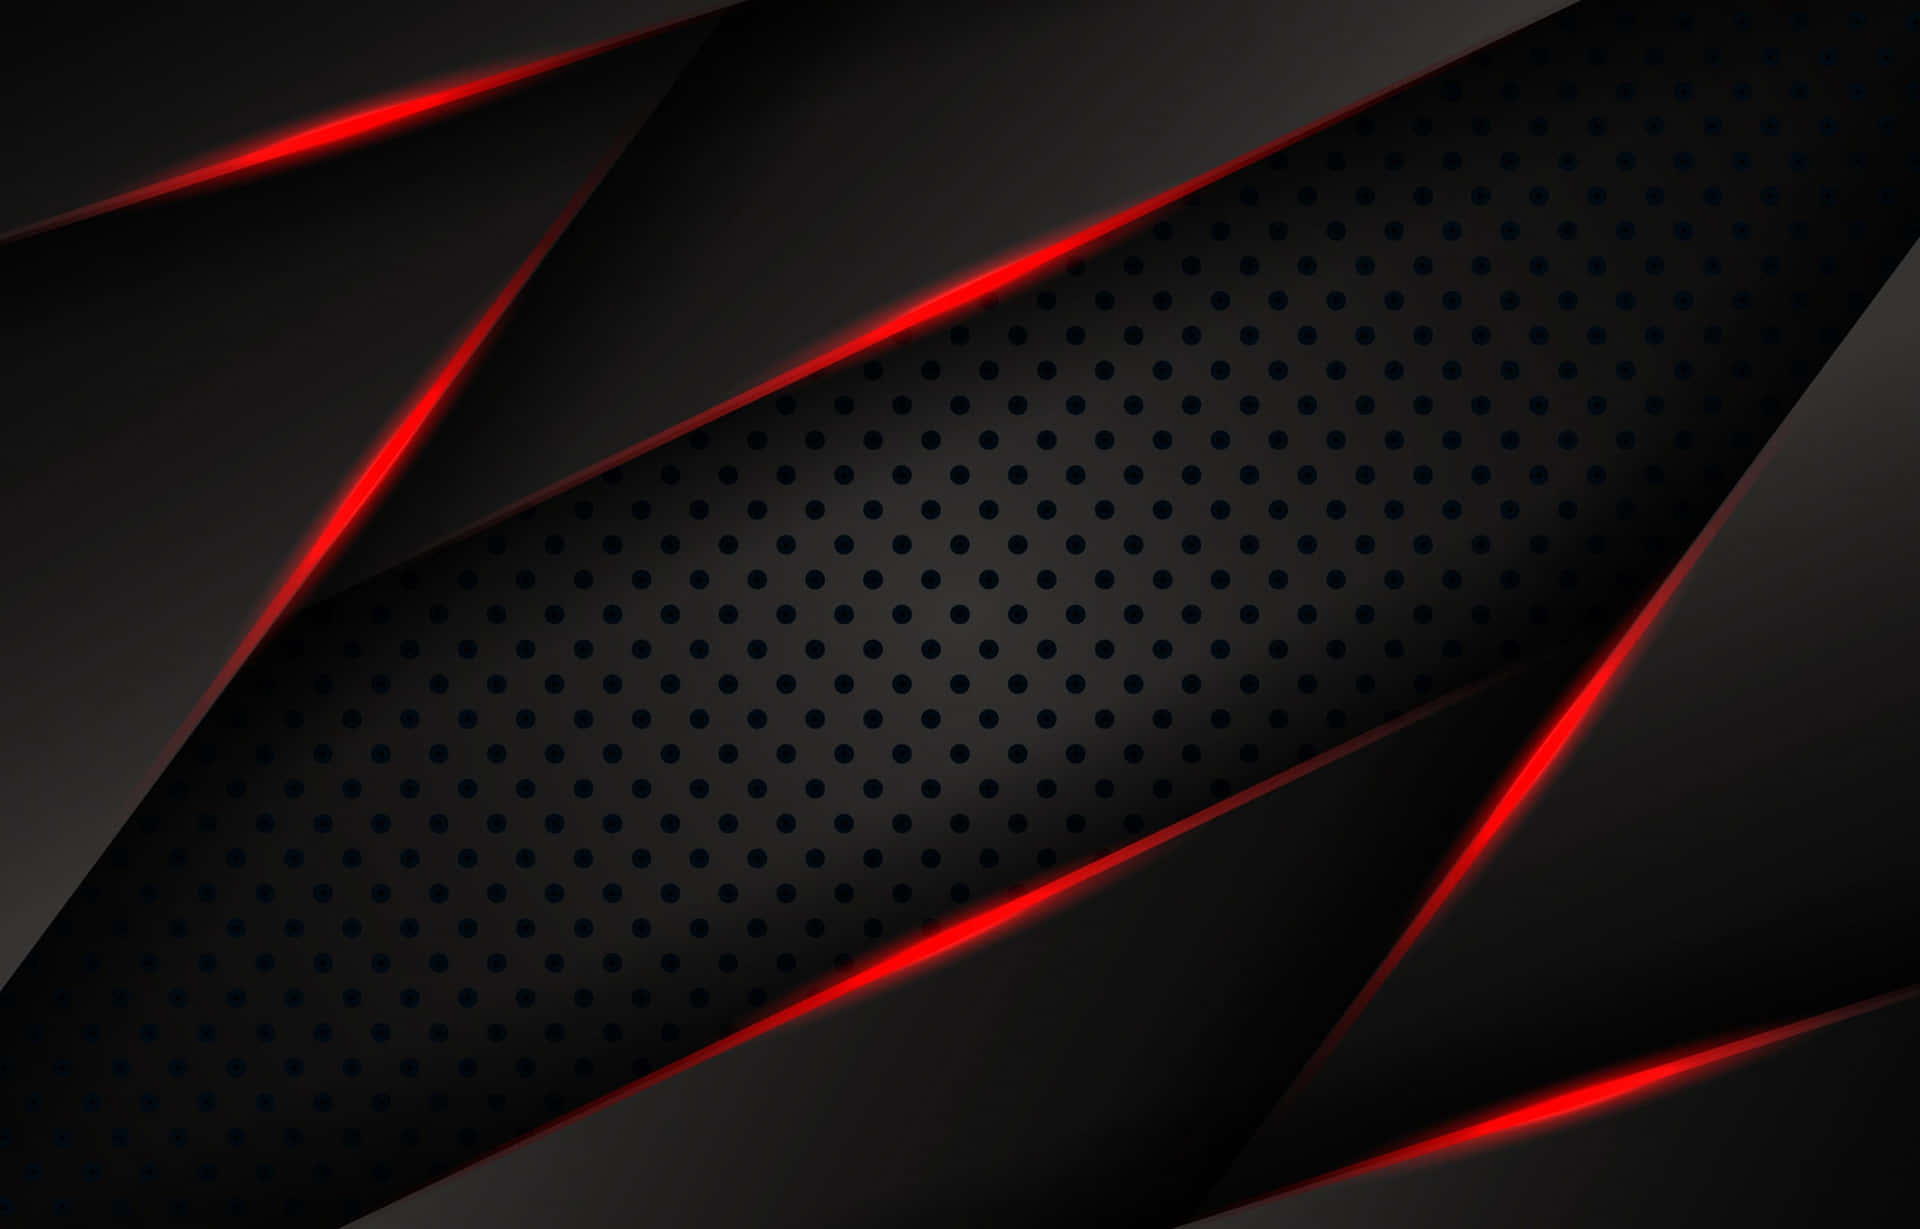 An intense and luxurious black and red background